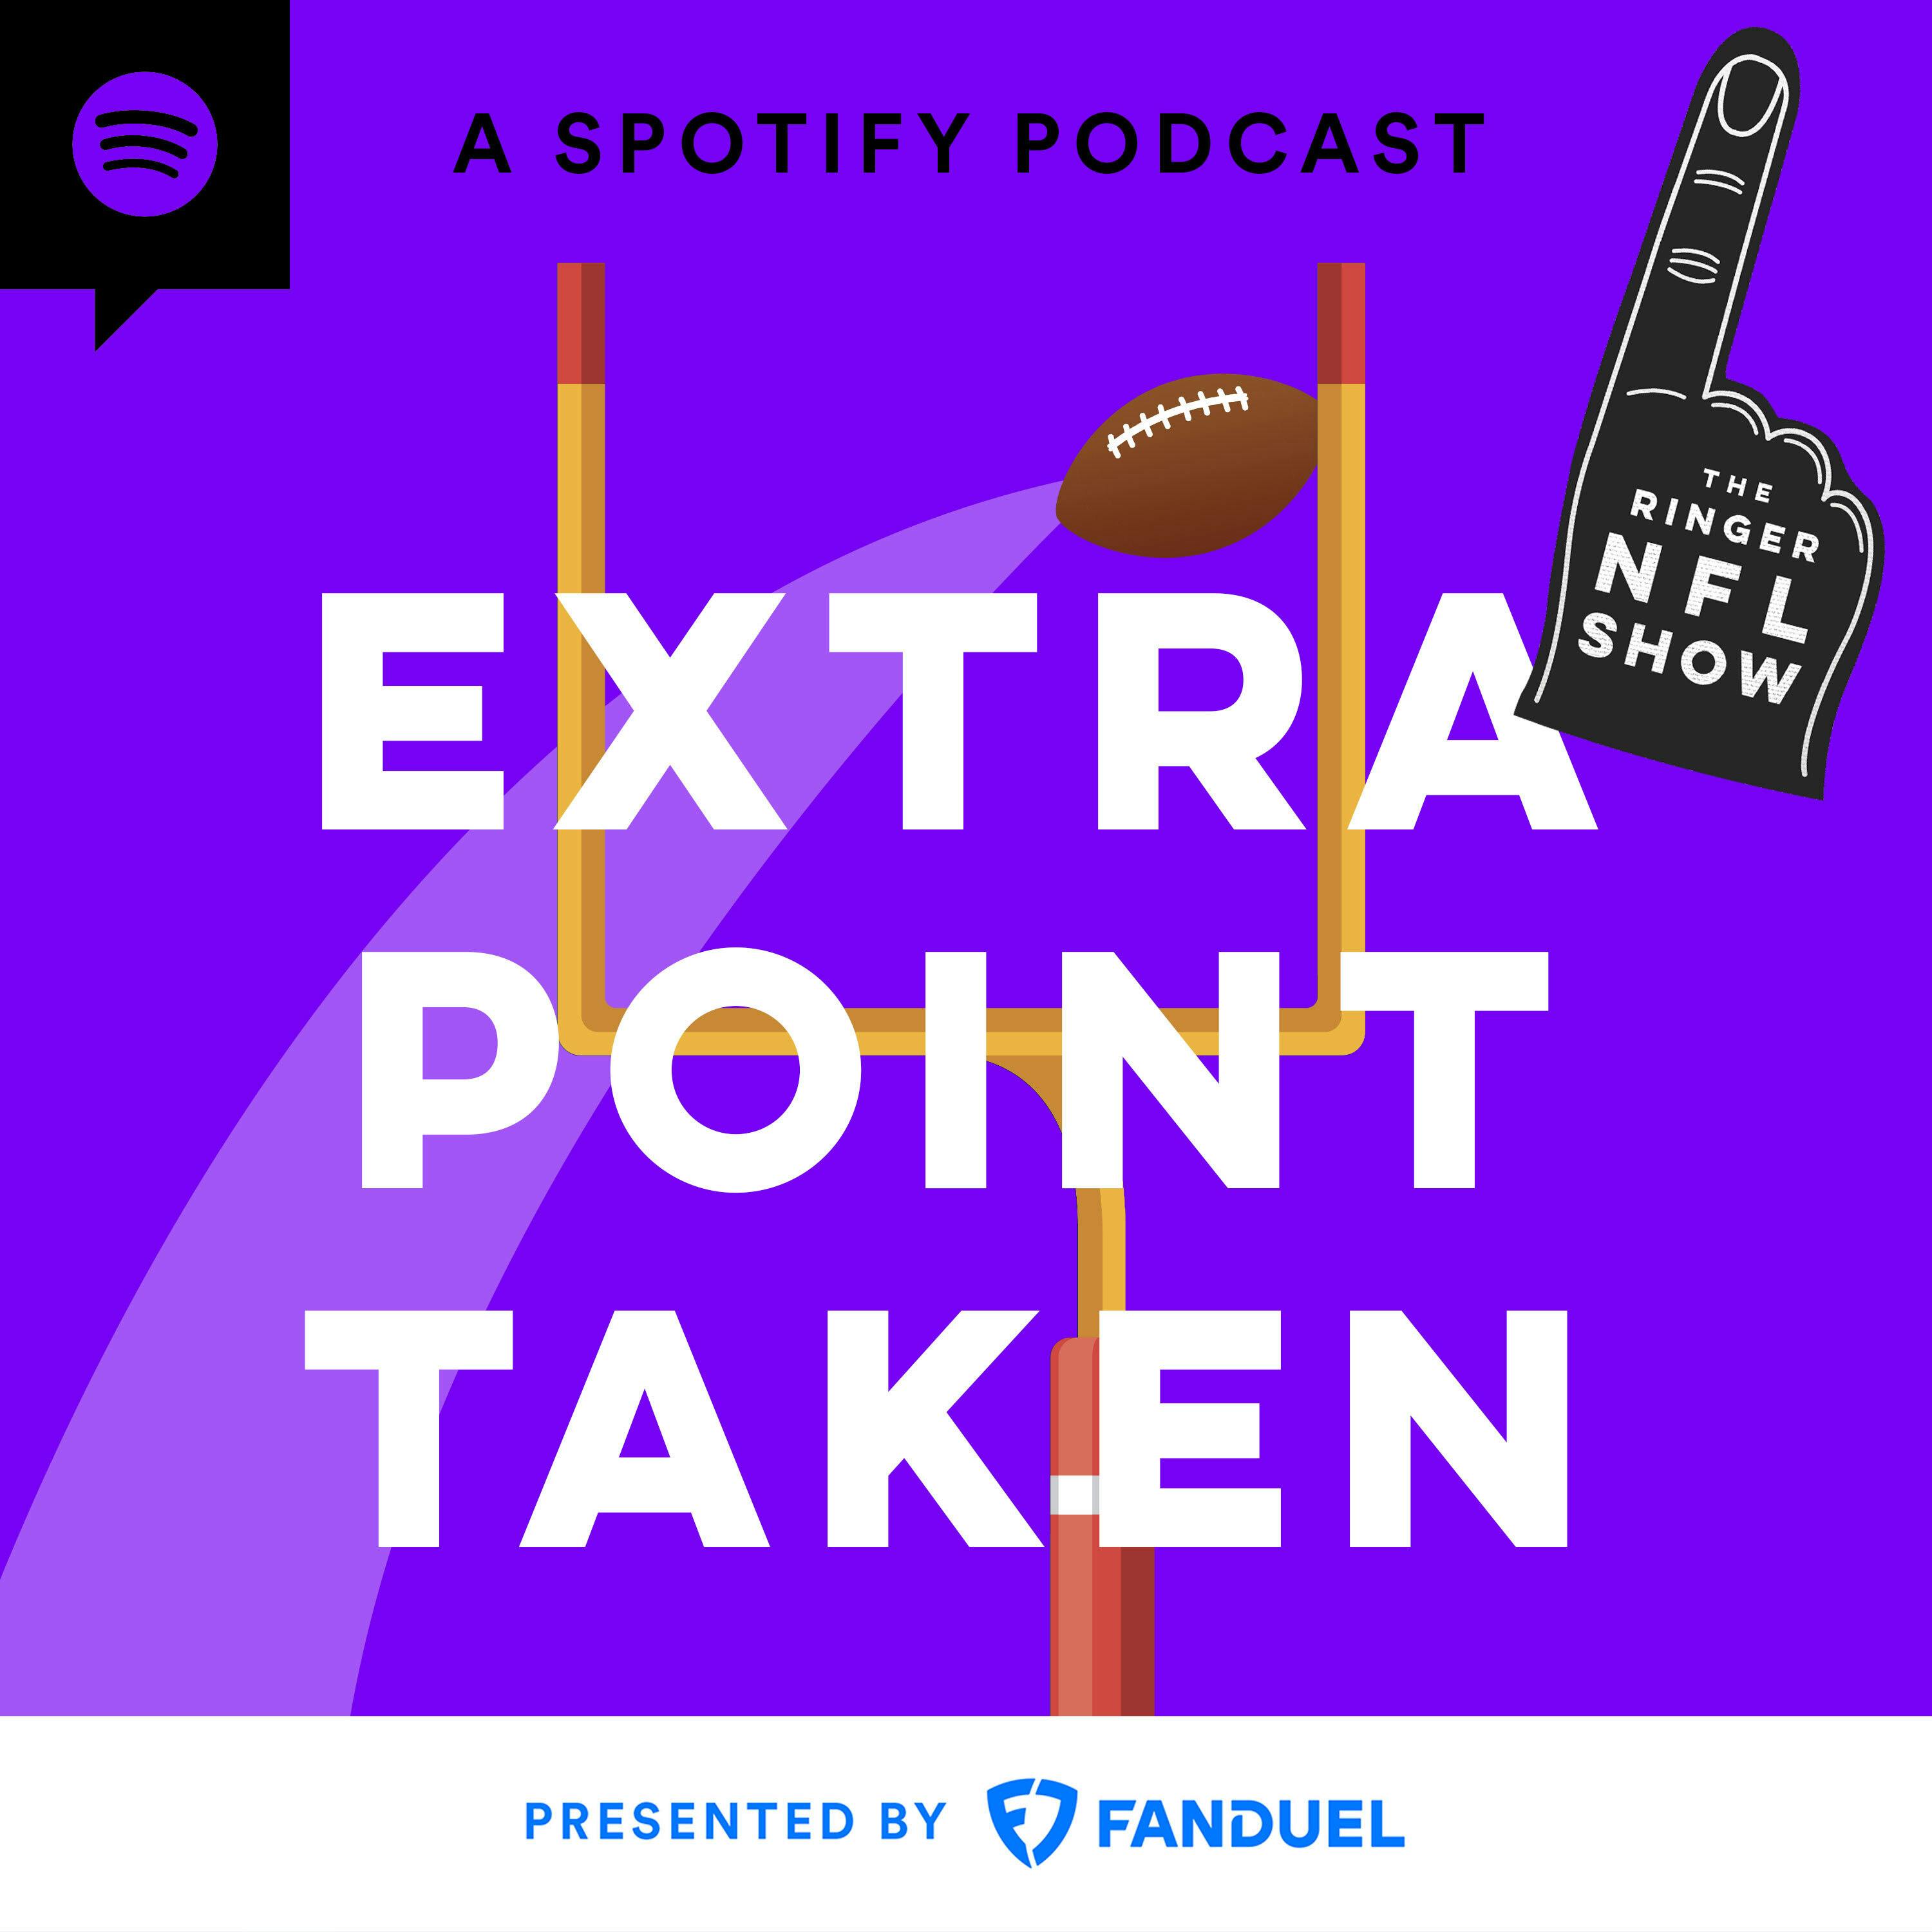 The Seahawks Defense Pounds on Daniel Jones, Brock Purdy Can Win the Super Bowl, and More Big Takeaways From Week 4 | Extra Point Taken